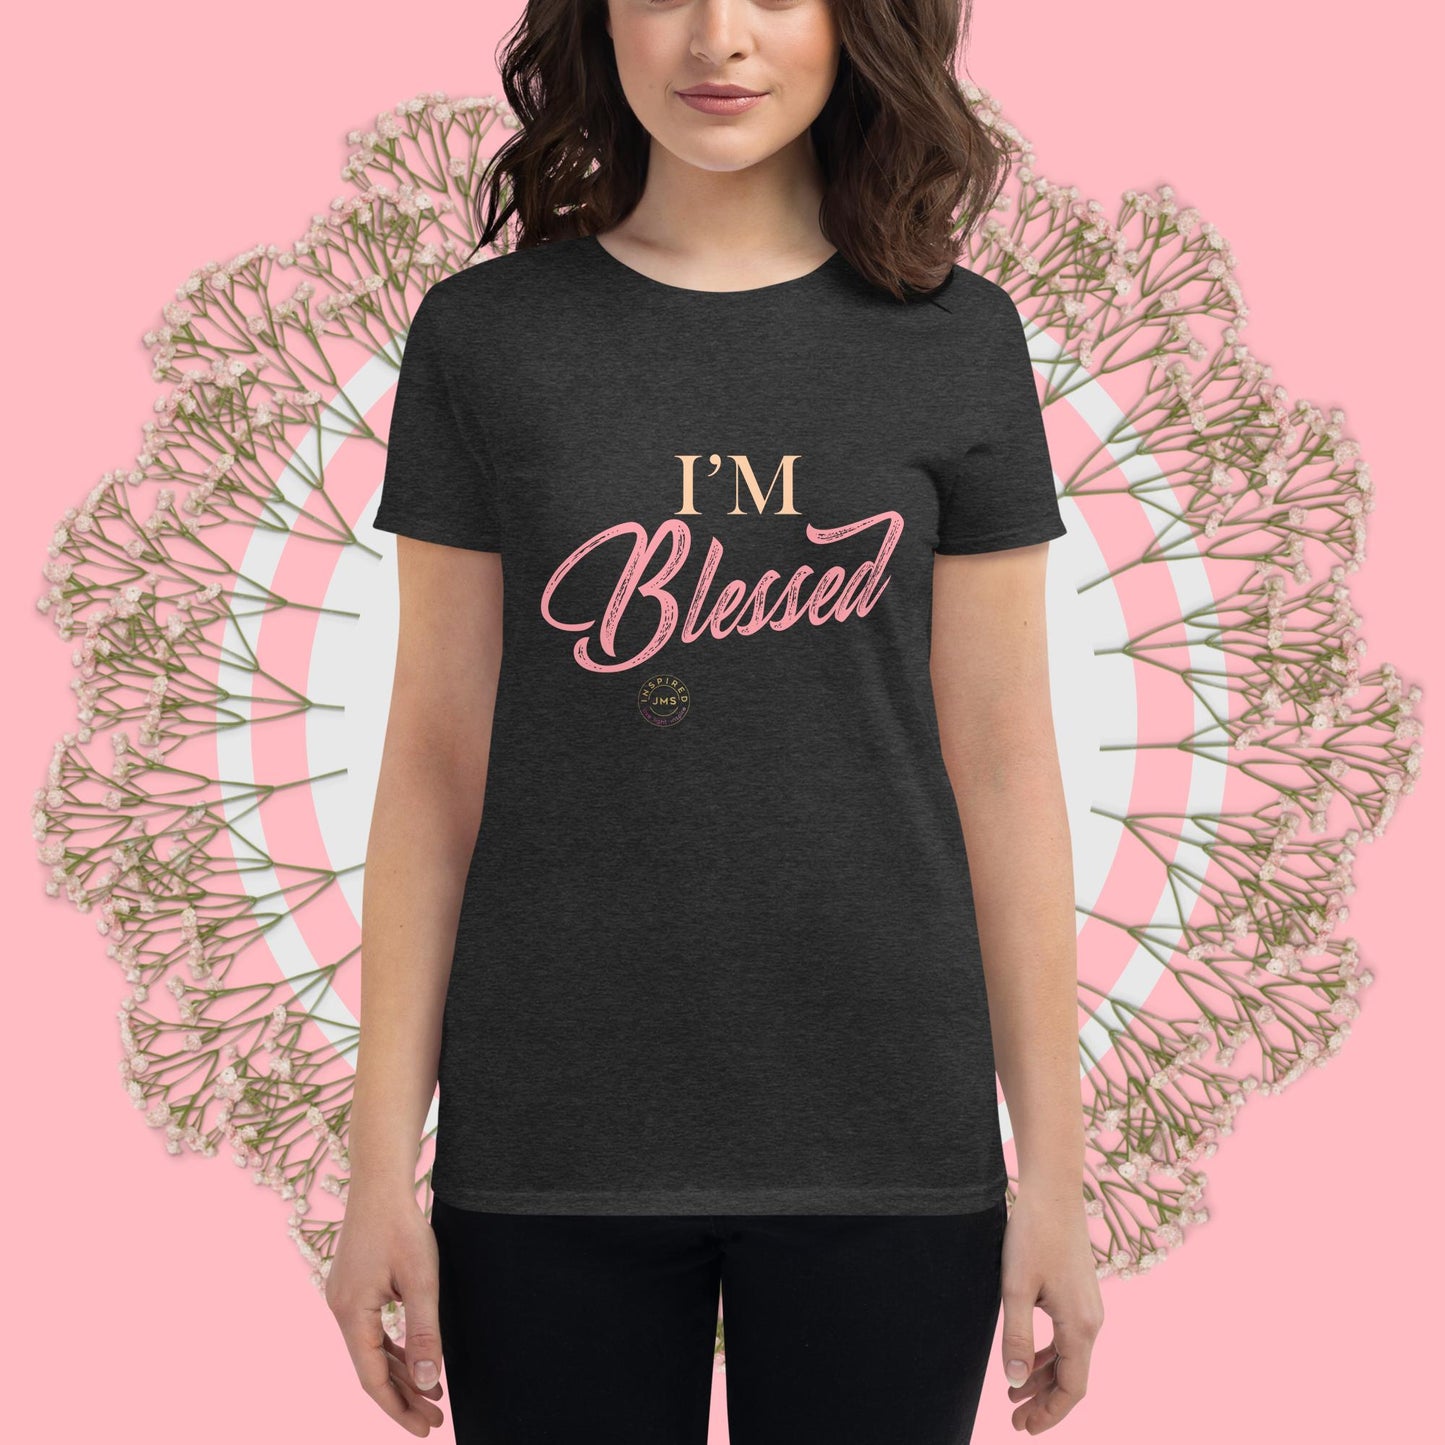 I'M Blessed Fit Tee